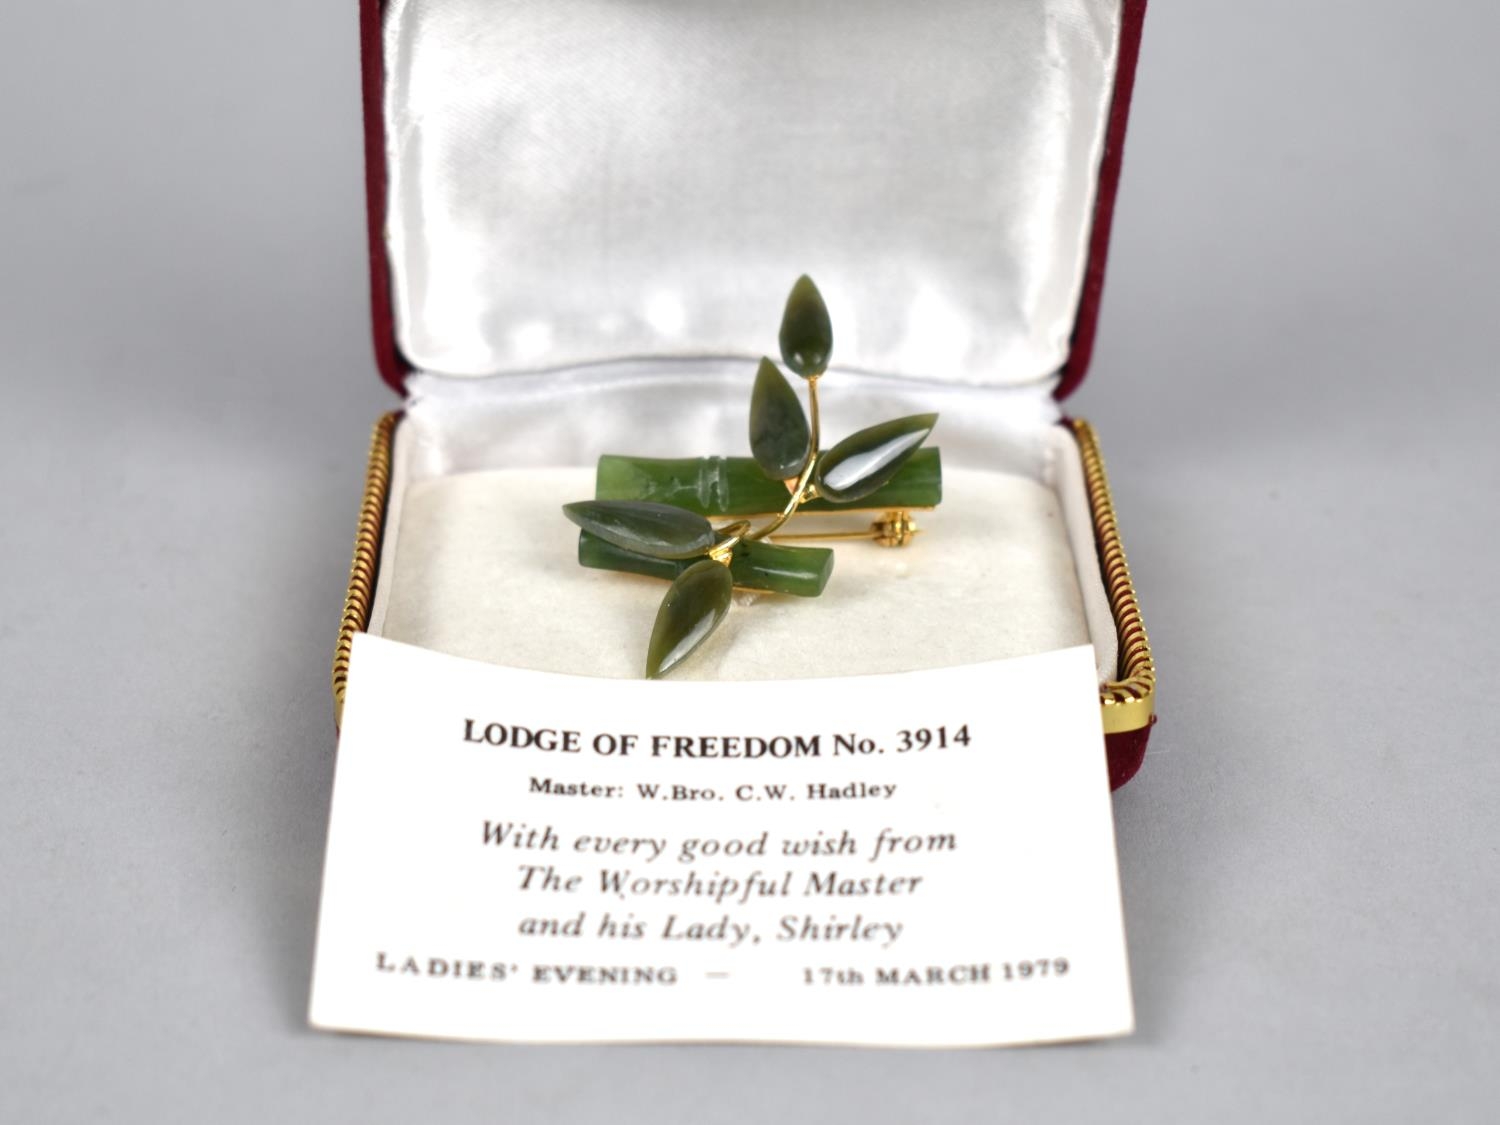 A Jadeite and Gilt Metal Vintage Brooch, In Box with Presentation Card Inscribed for 'Lodge of - Image 2 of 2